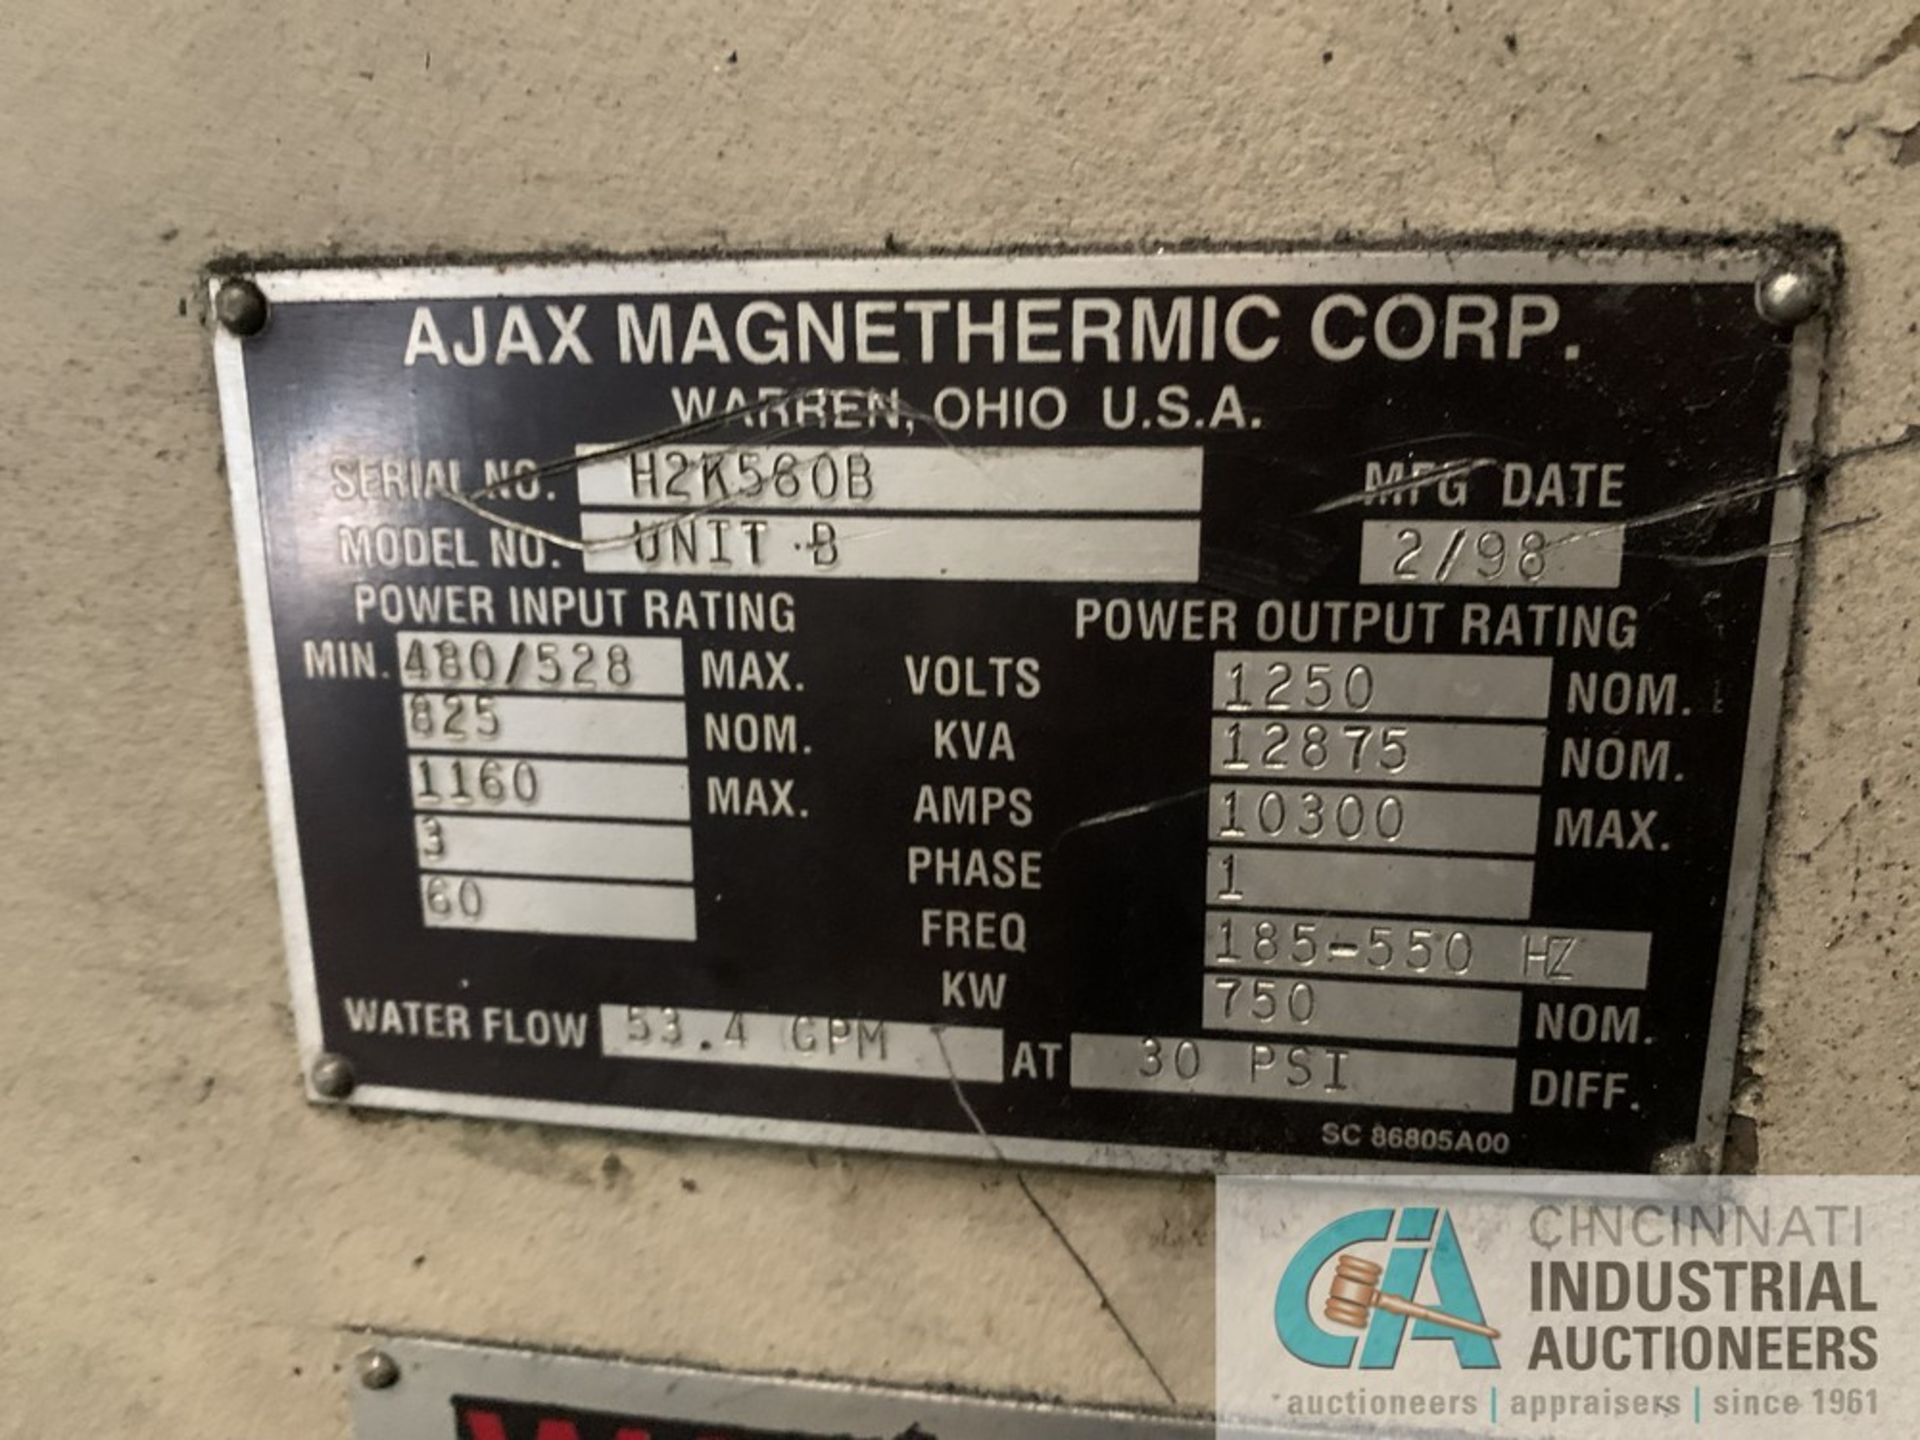 750 KW AJAX MAGNETHERMIC PACER II INDUCTION HEAT POWER SUPPLY; S/N H2K560B, 1,250 VOLT, 12,875 KVA - Image 3 of 6